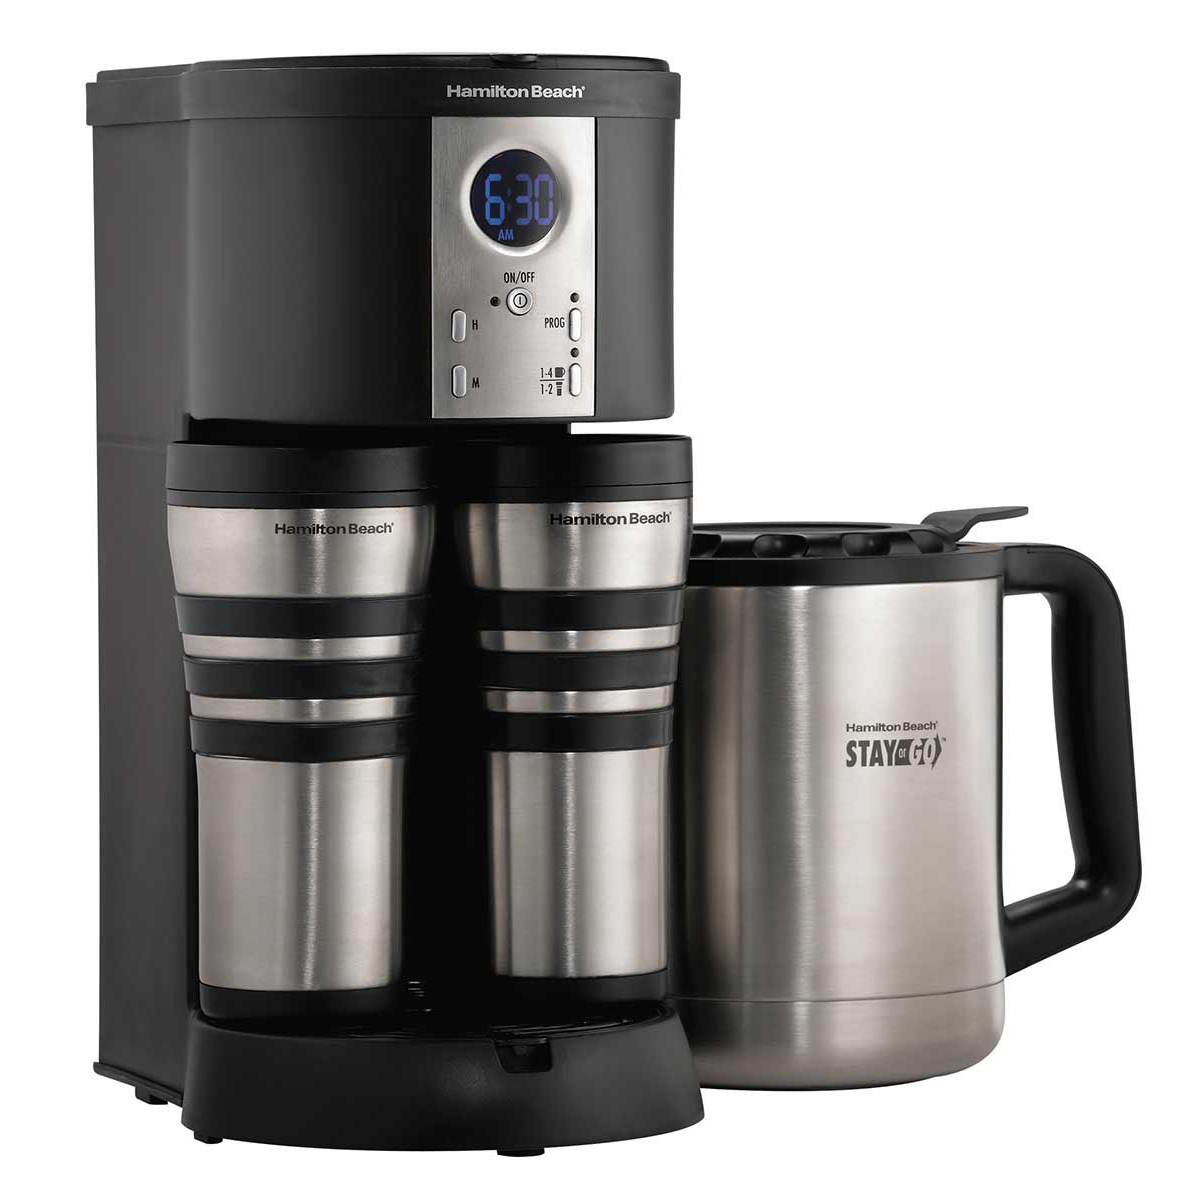 Stay or Go® Deluxe Thermal Coffeemaker (45237)